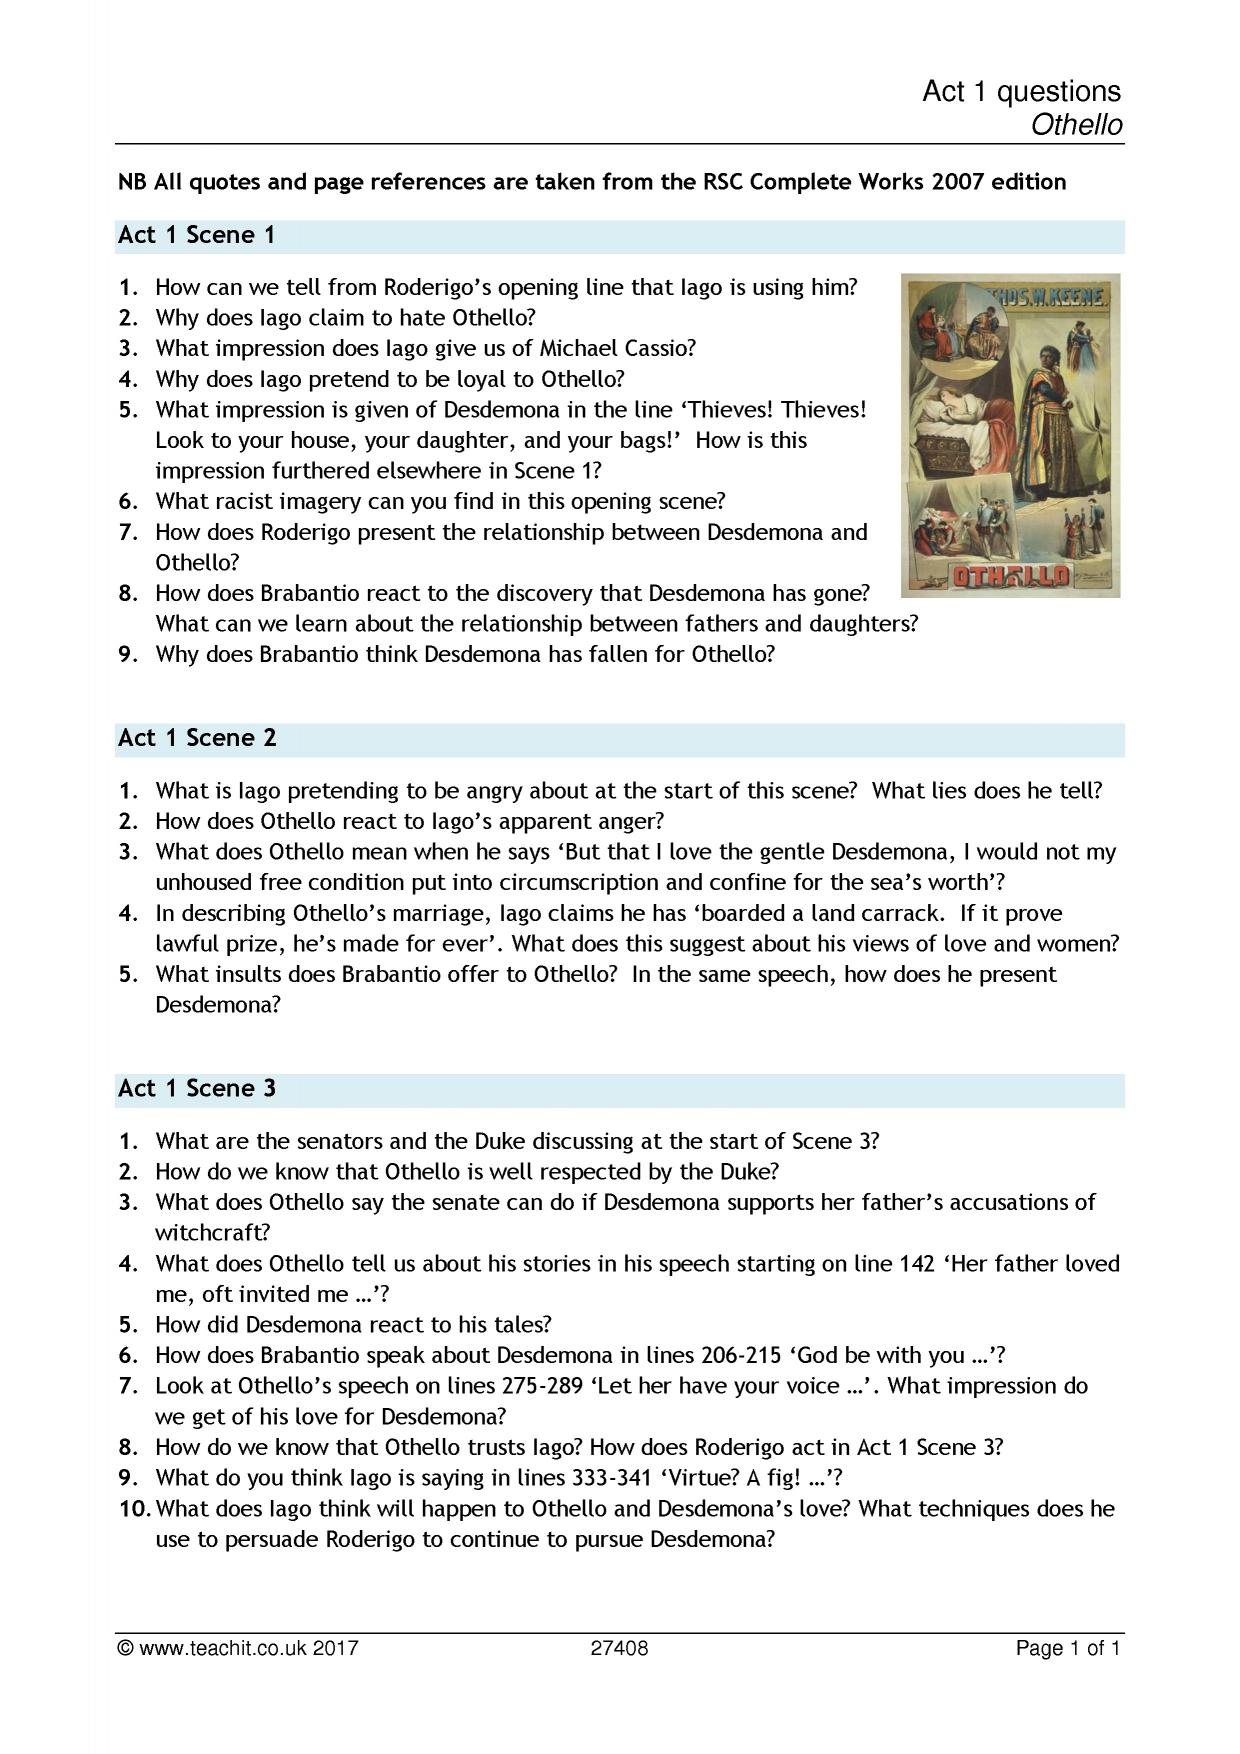 Act 1 questions: Othello | A-level | Teachit